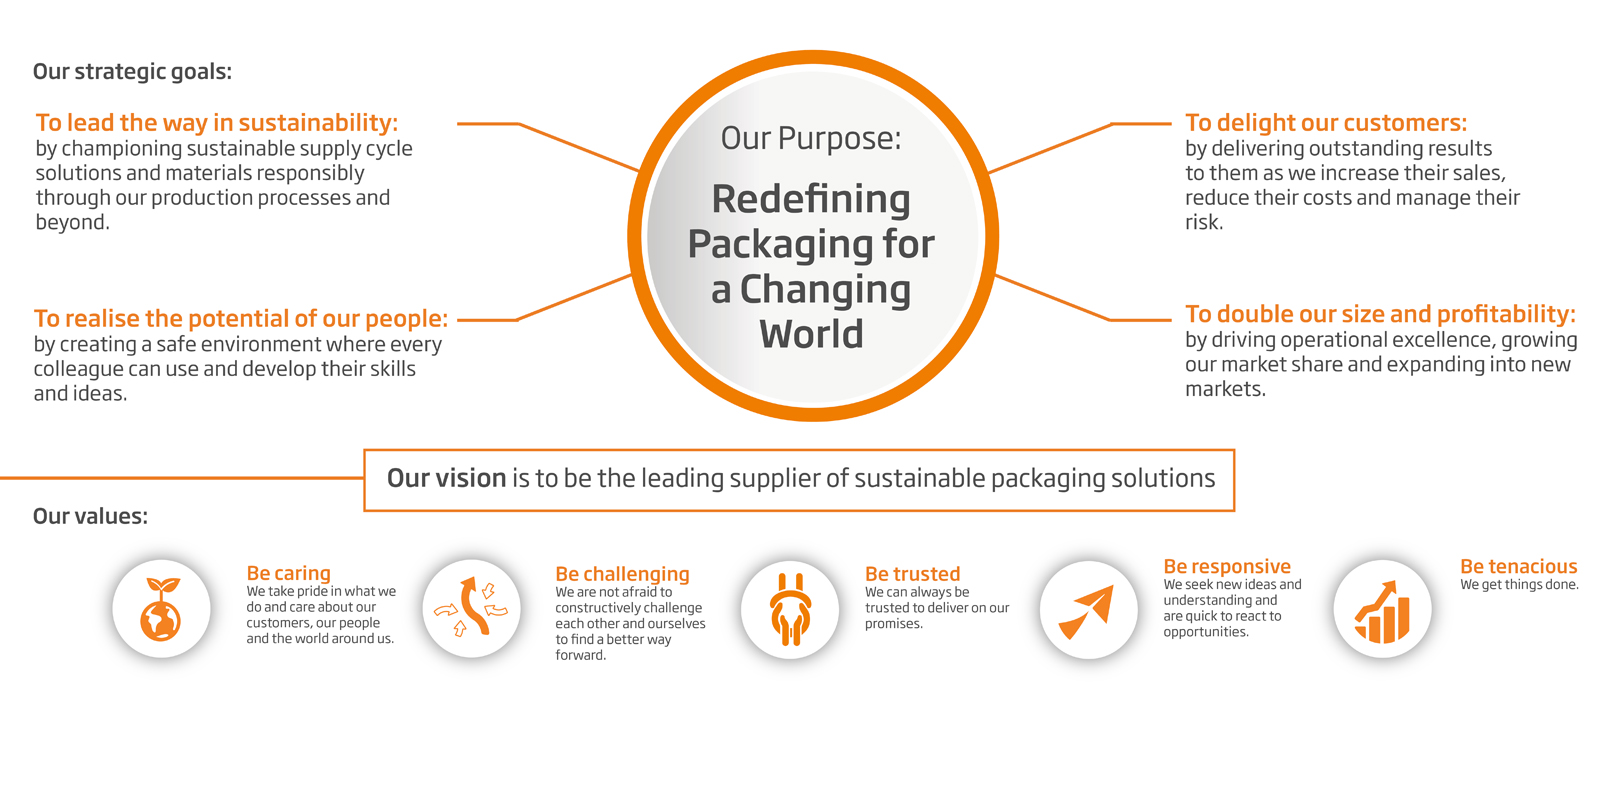 Ons Purpose - Redefining Packaging for a Changing World